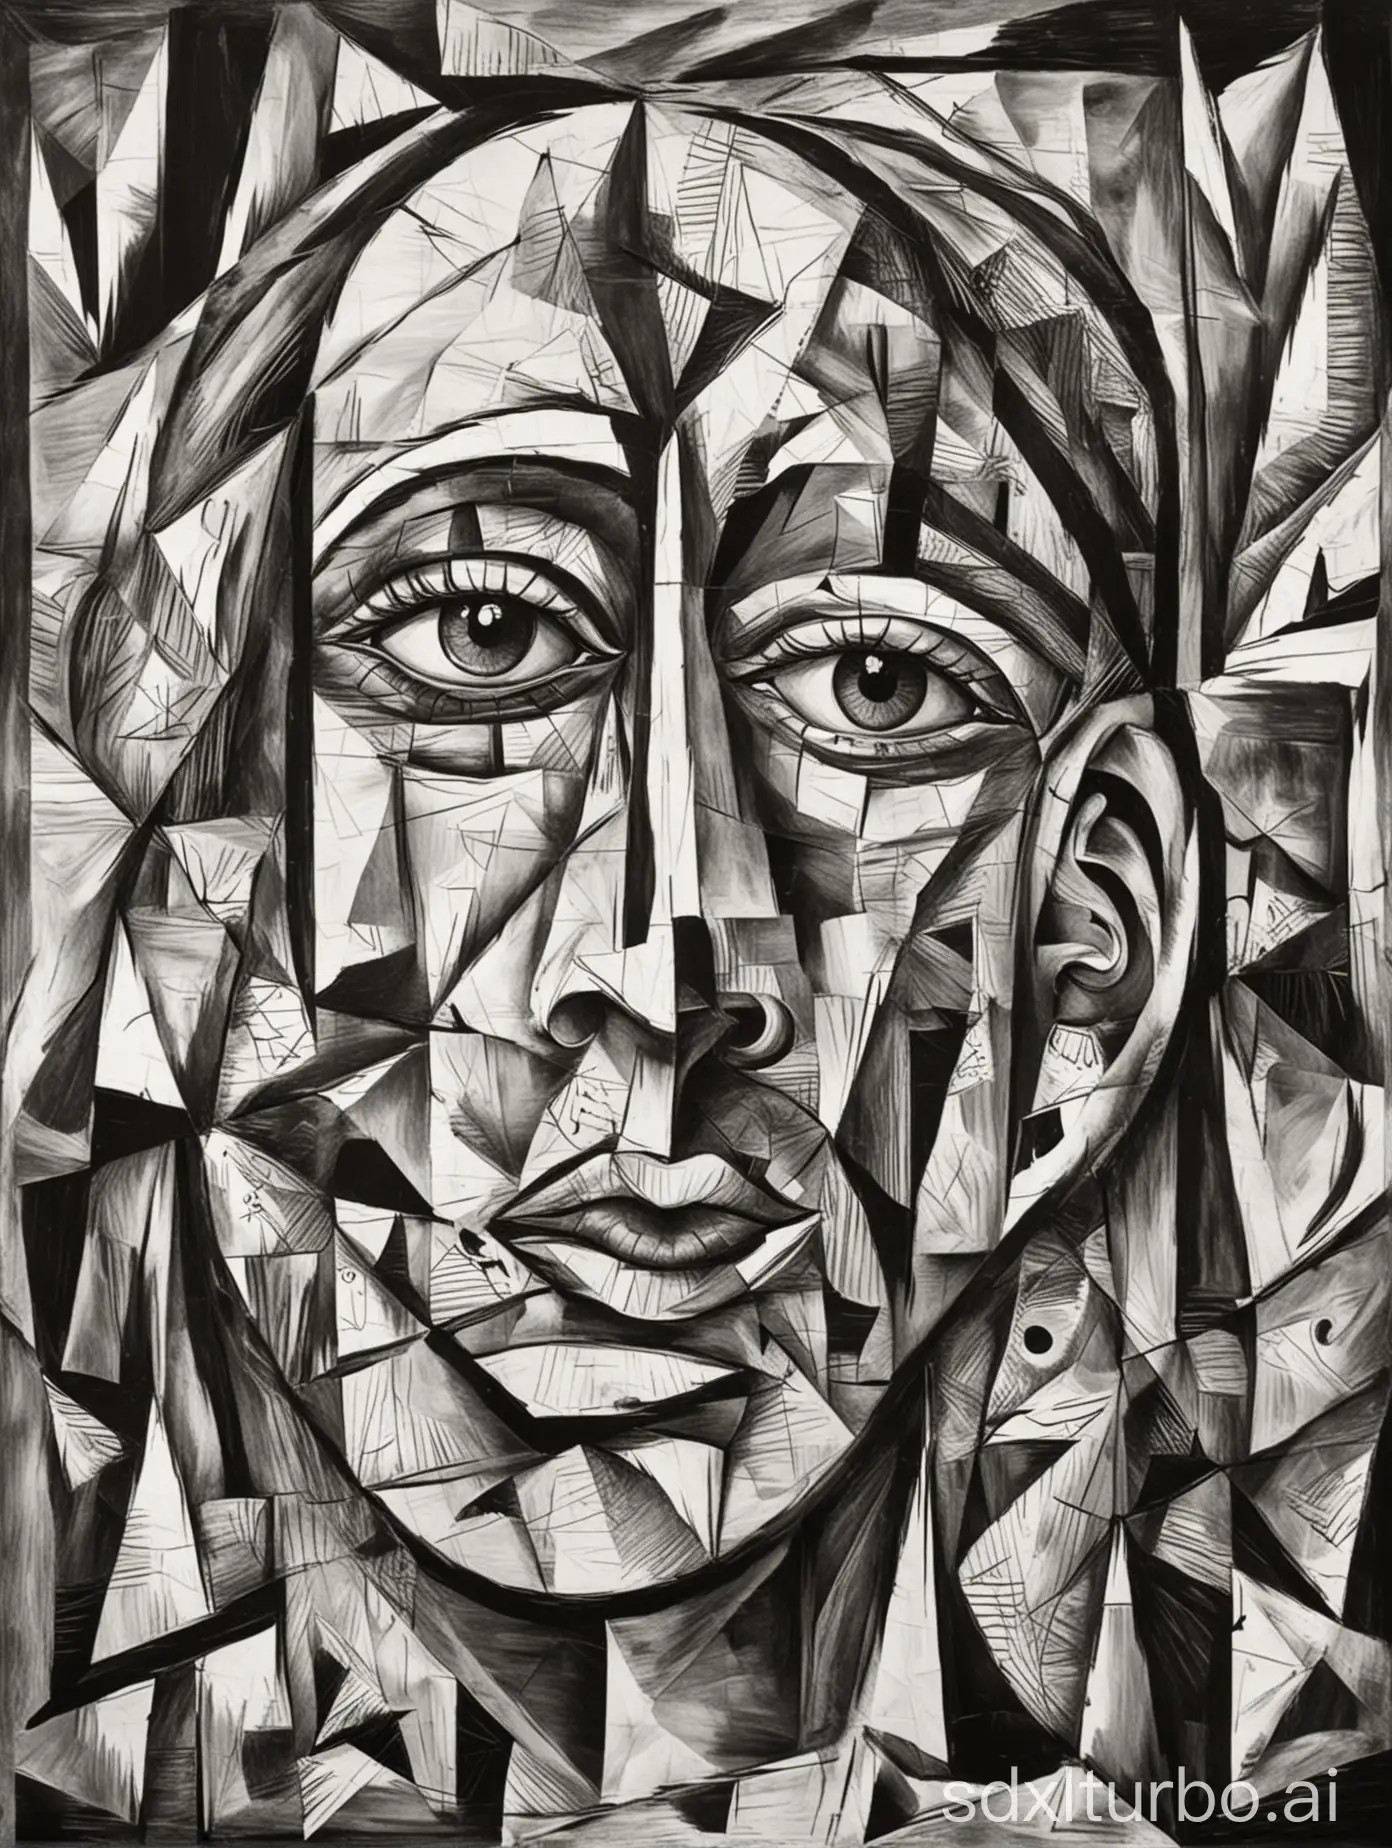 draw an abstract black and white background reminiscent of picasso's style